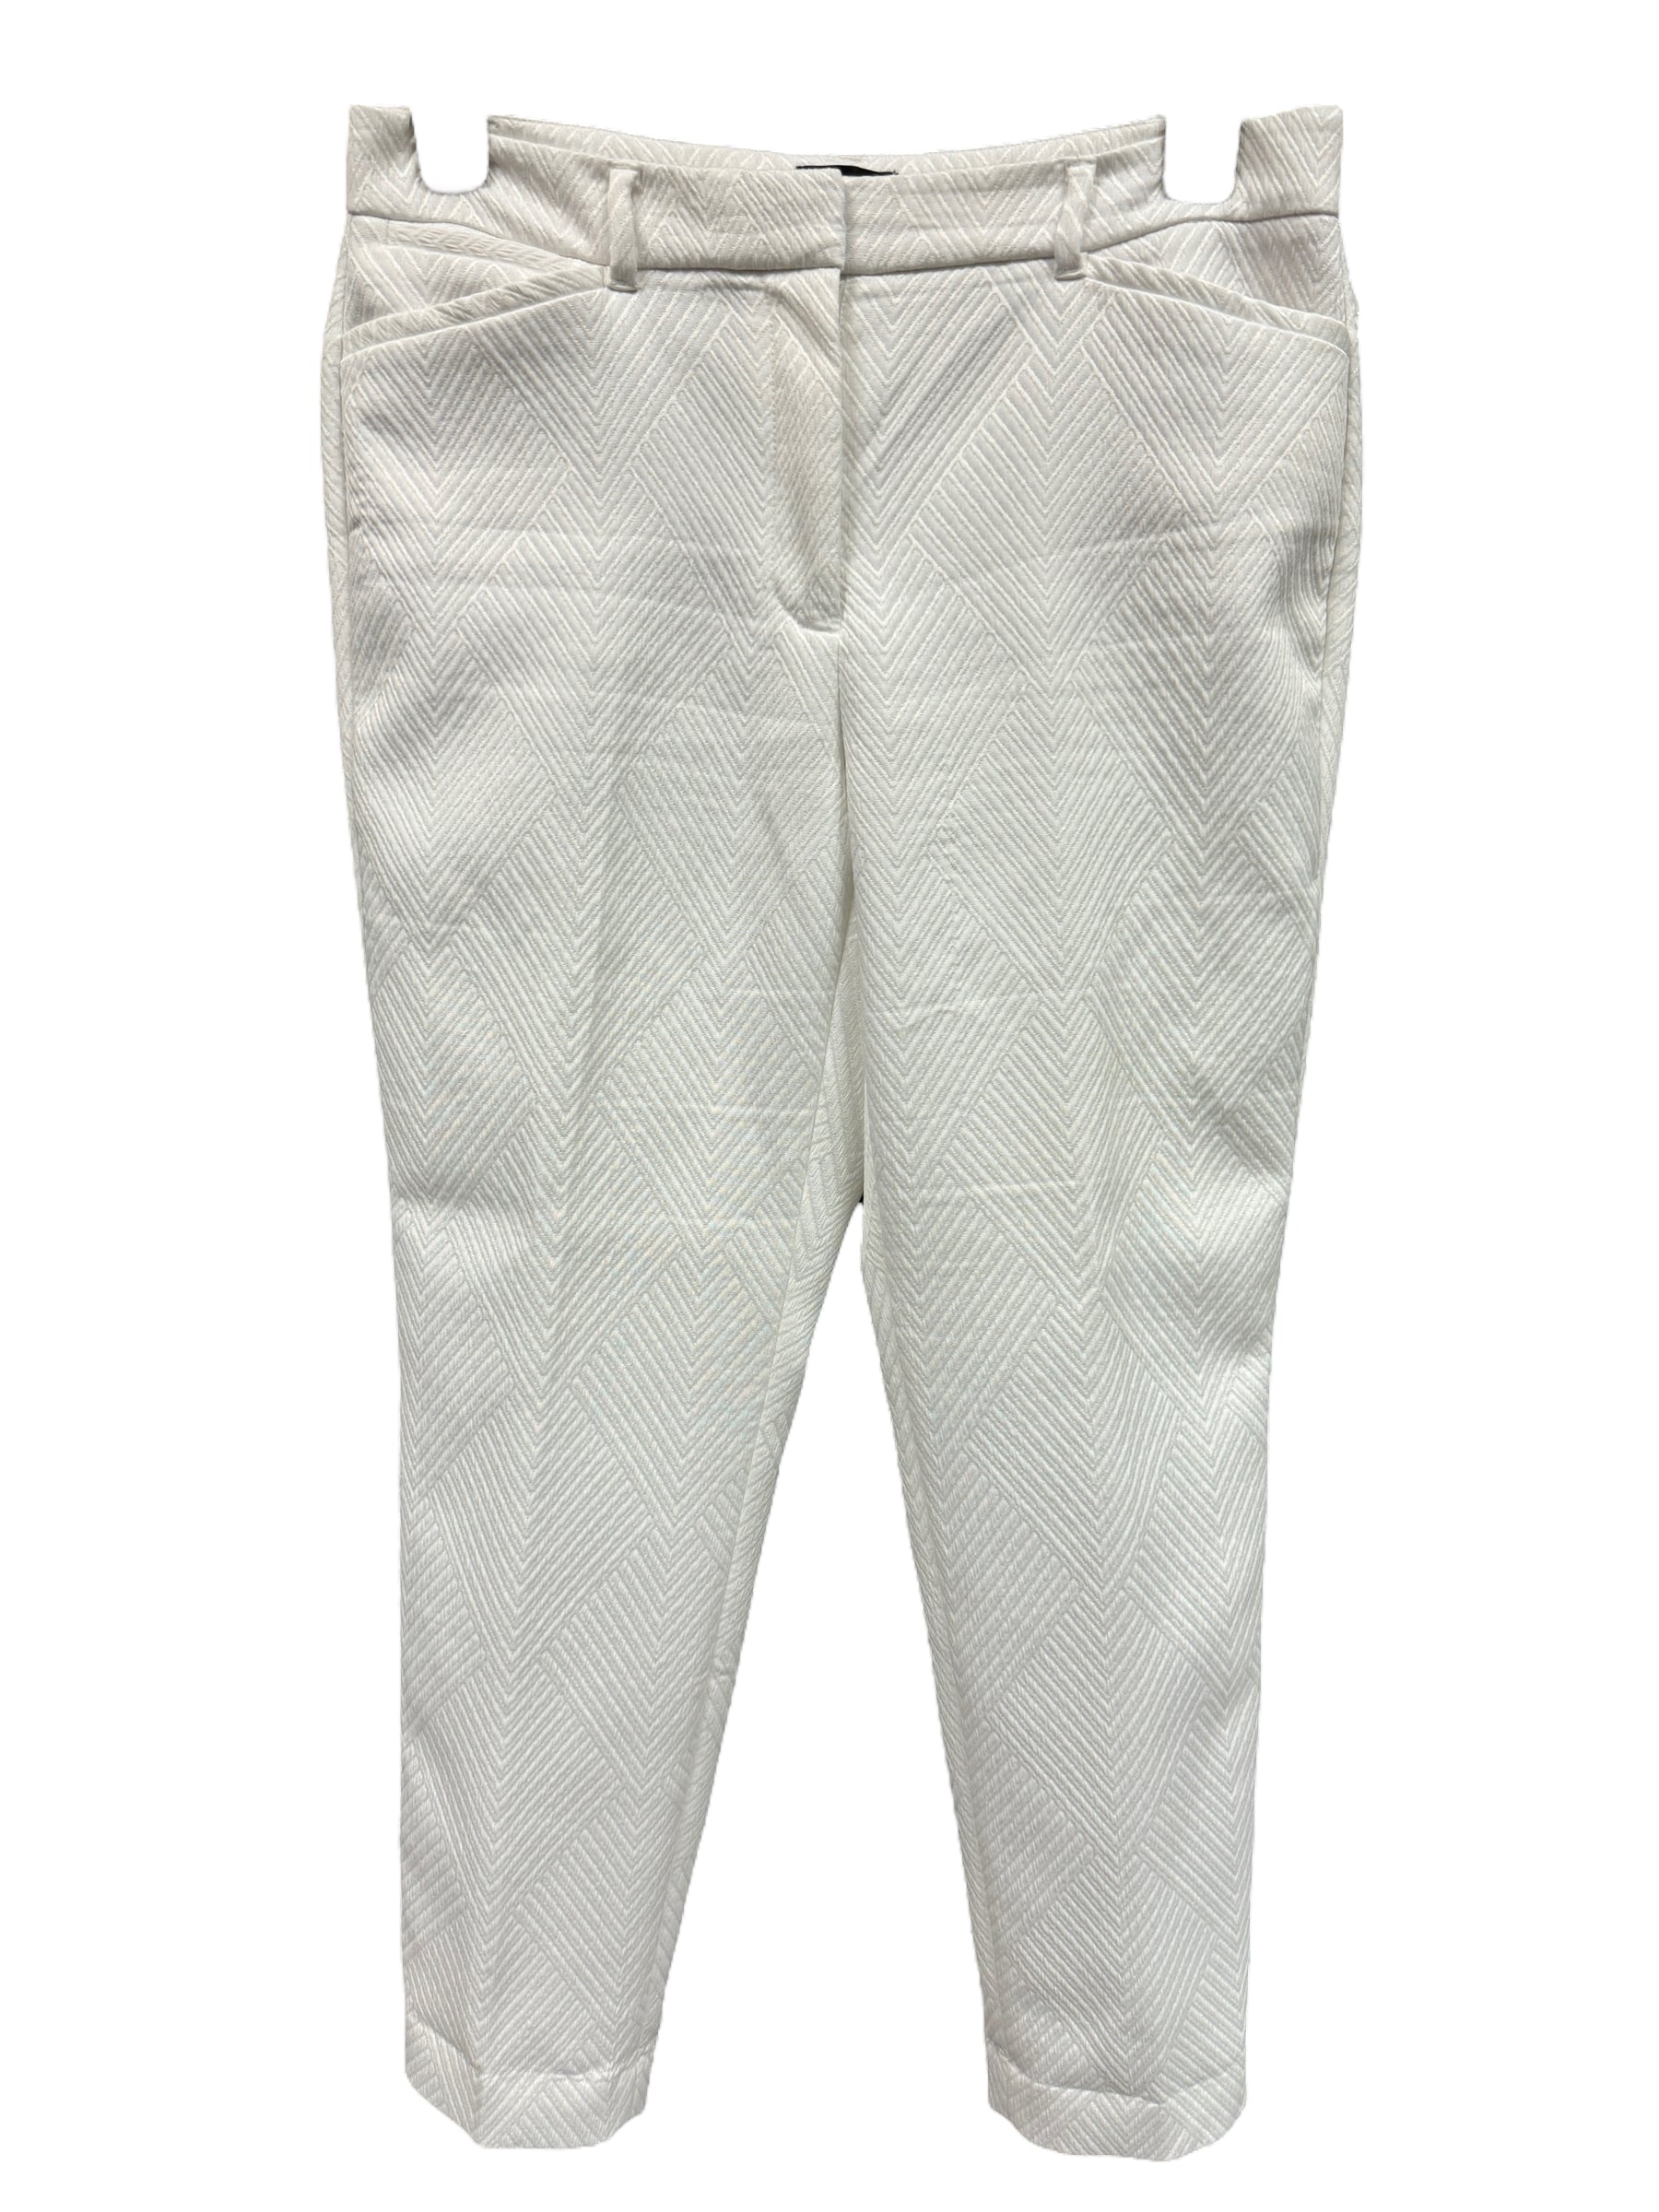 Pants Ankle By White House Black Market Size: 4